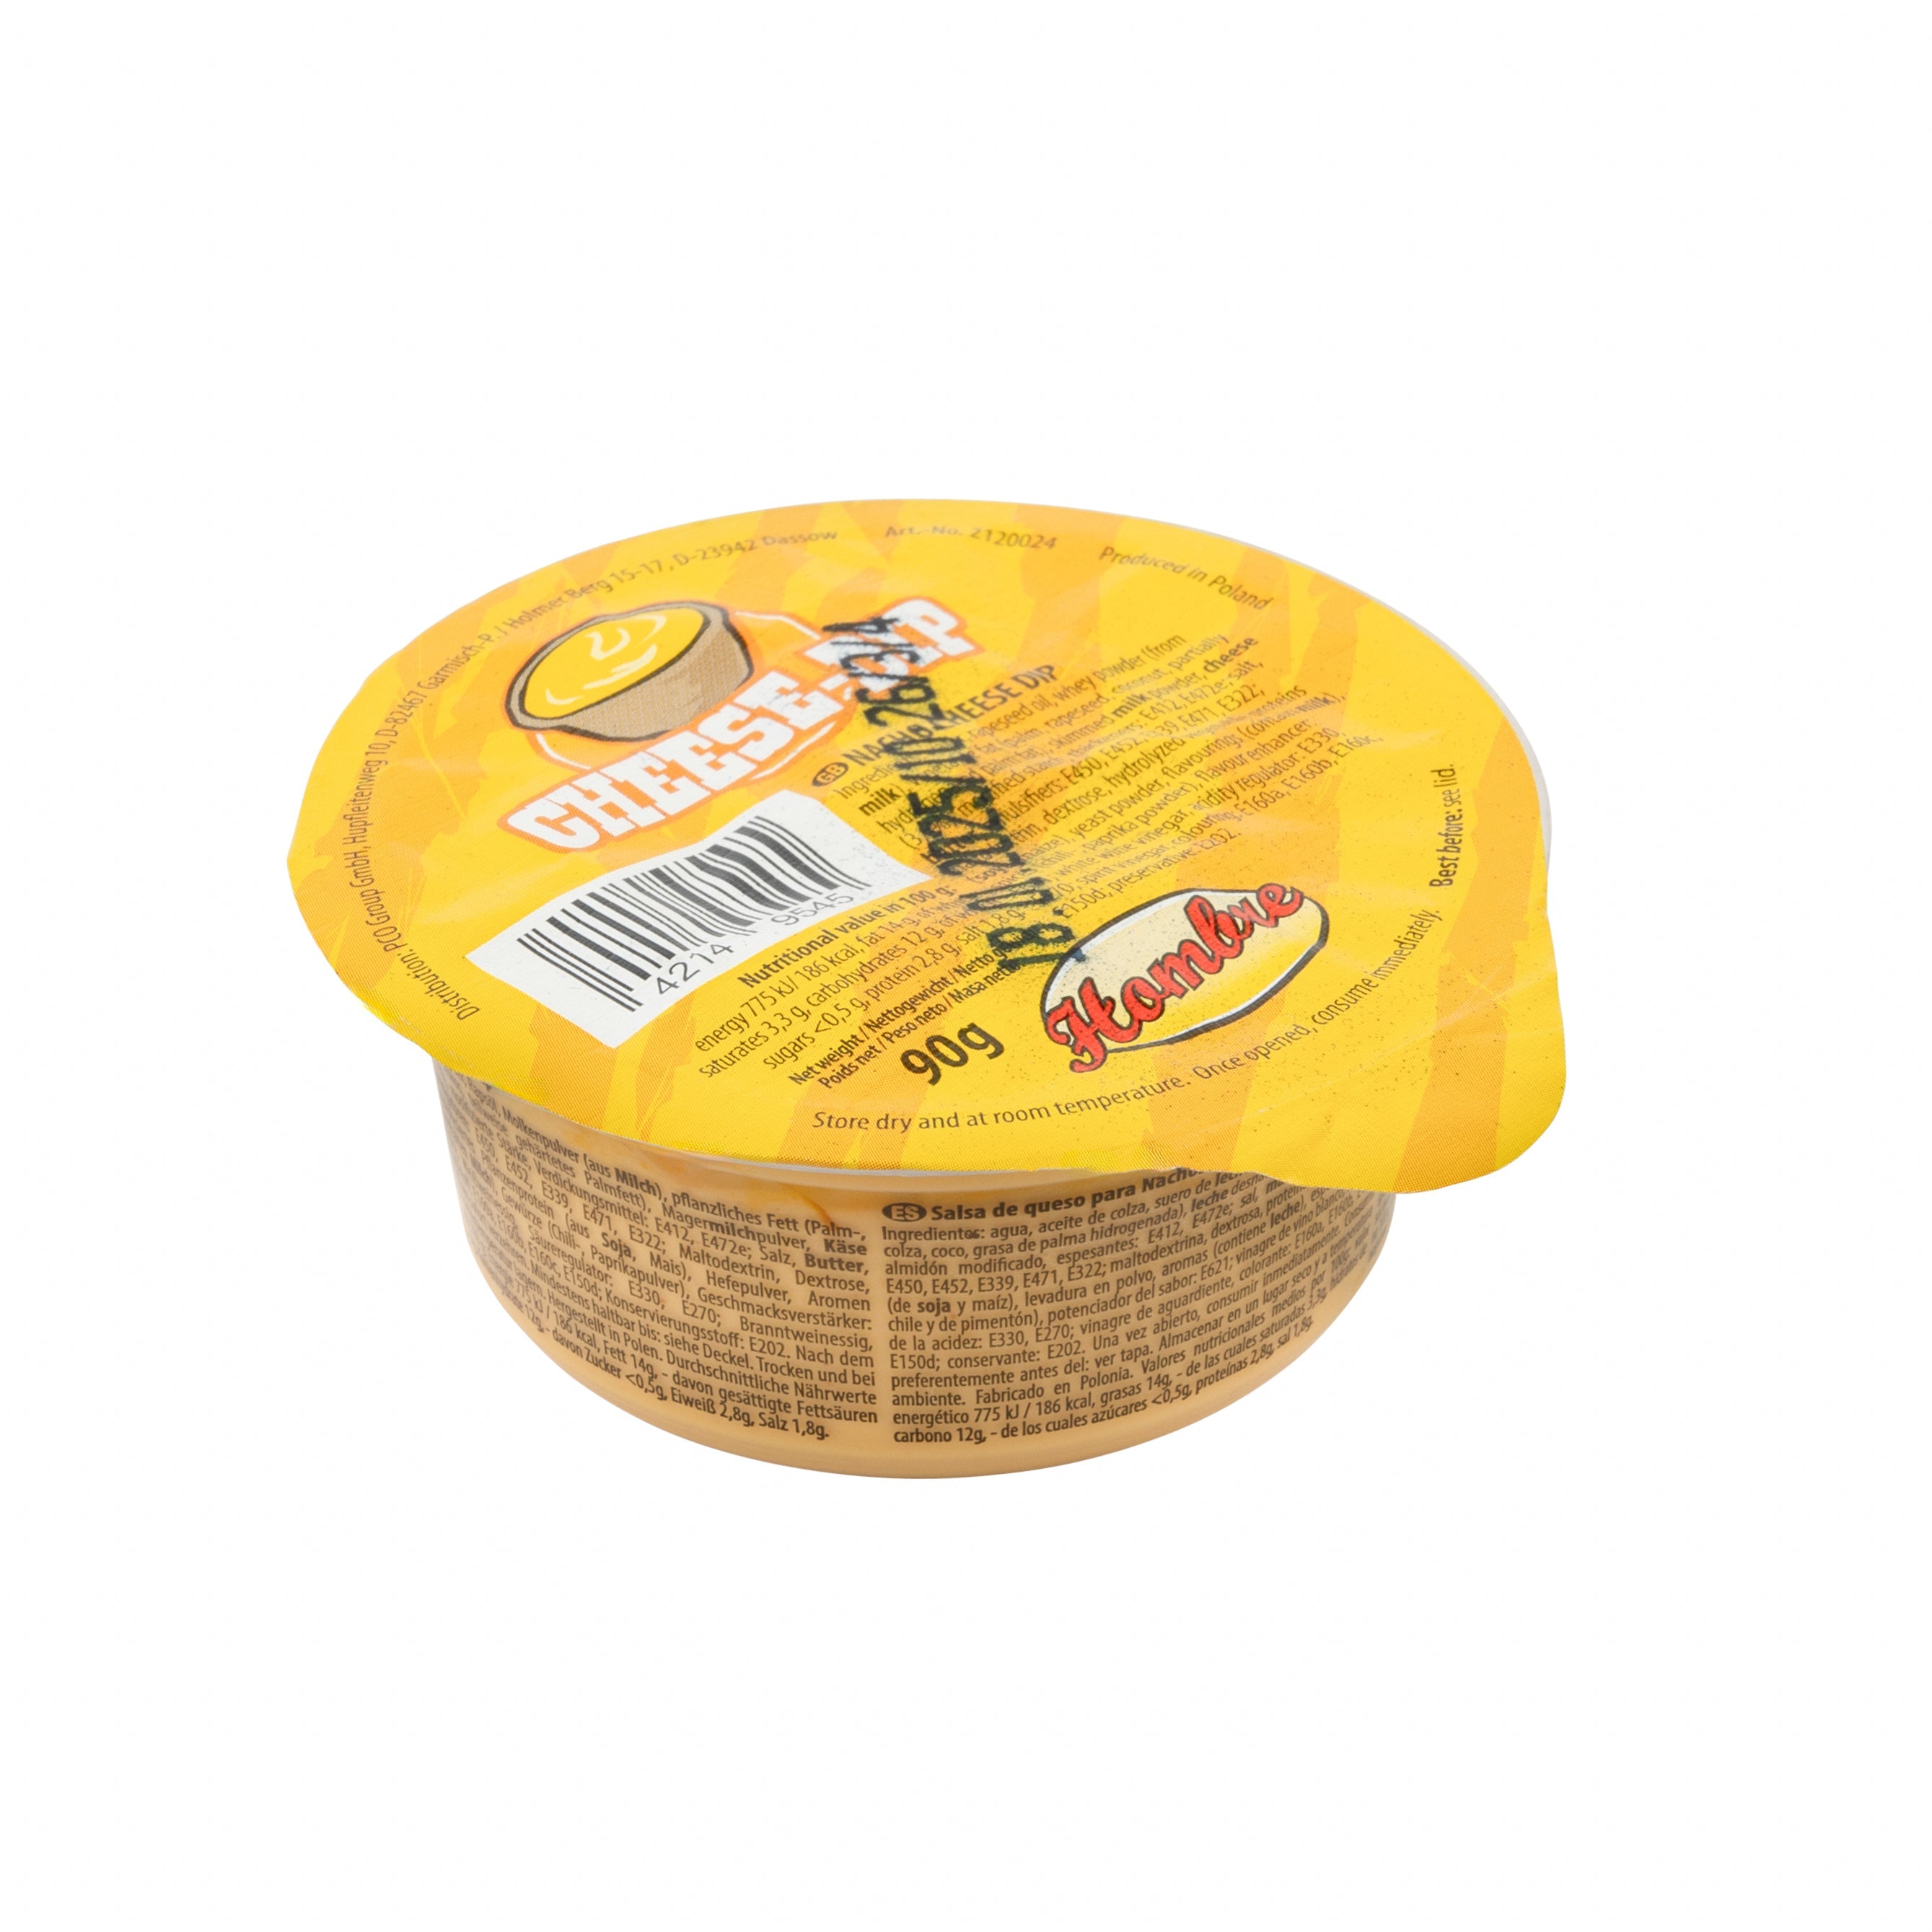 Hombre Cheese Dip Portion 48 x 90g